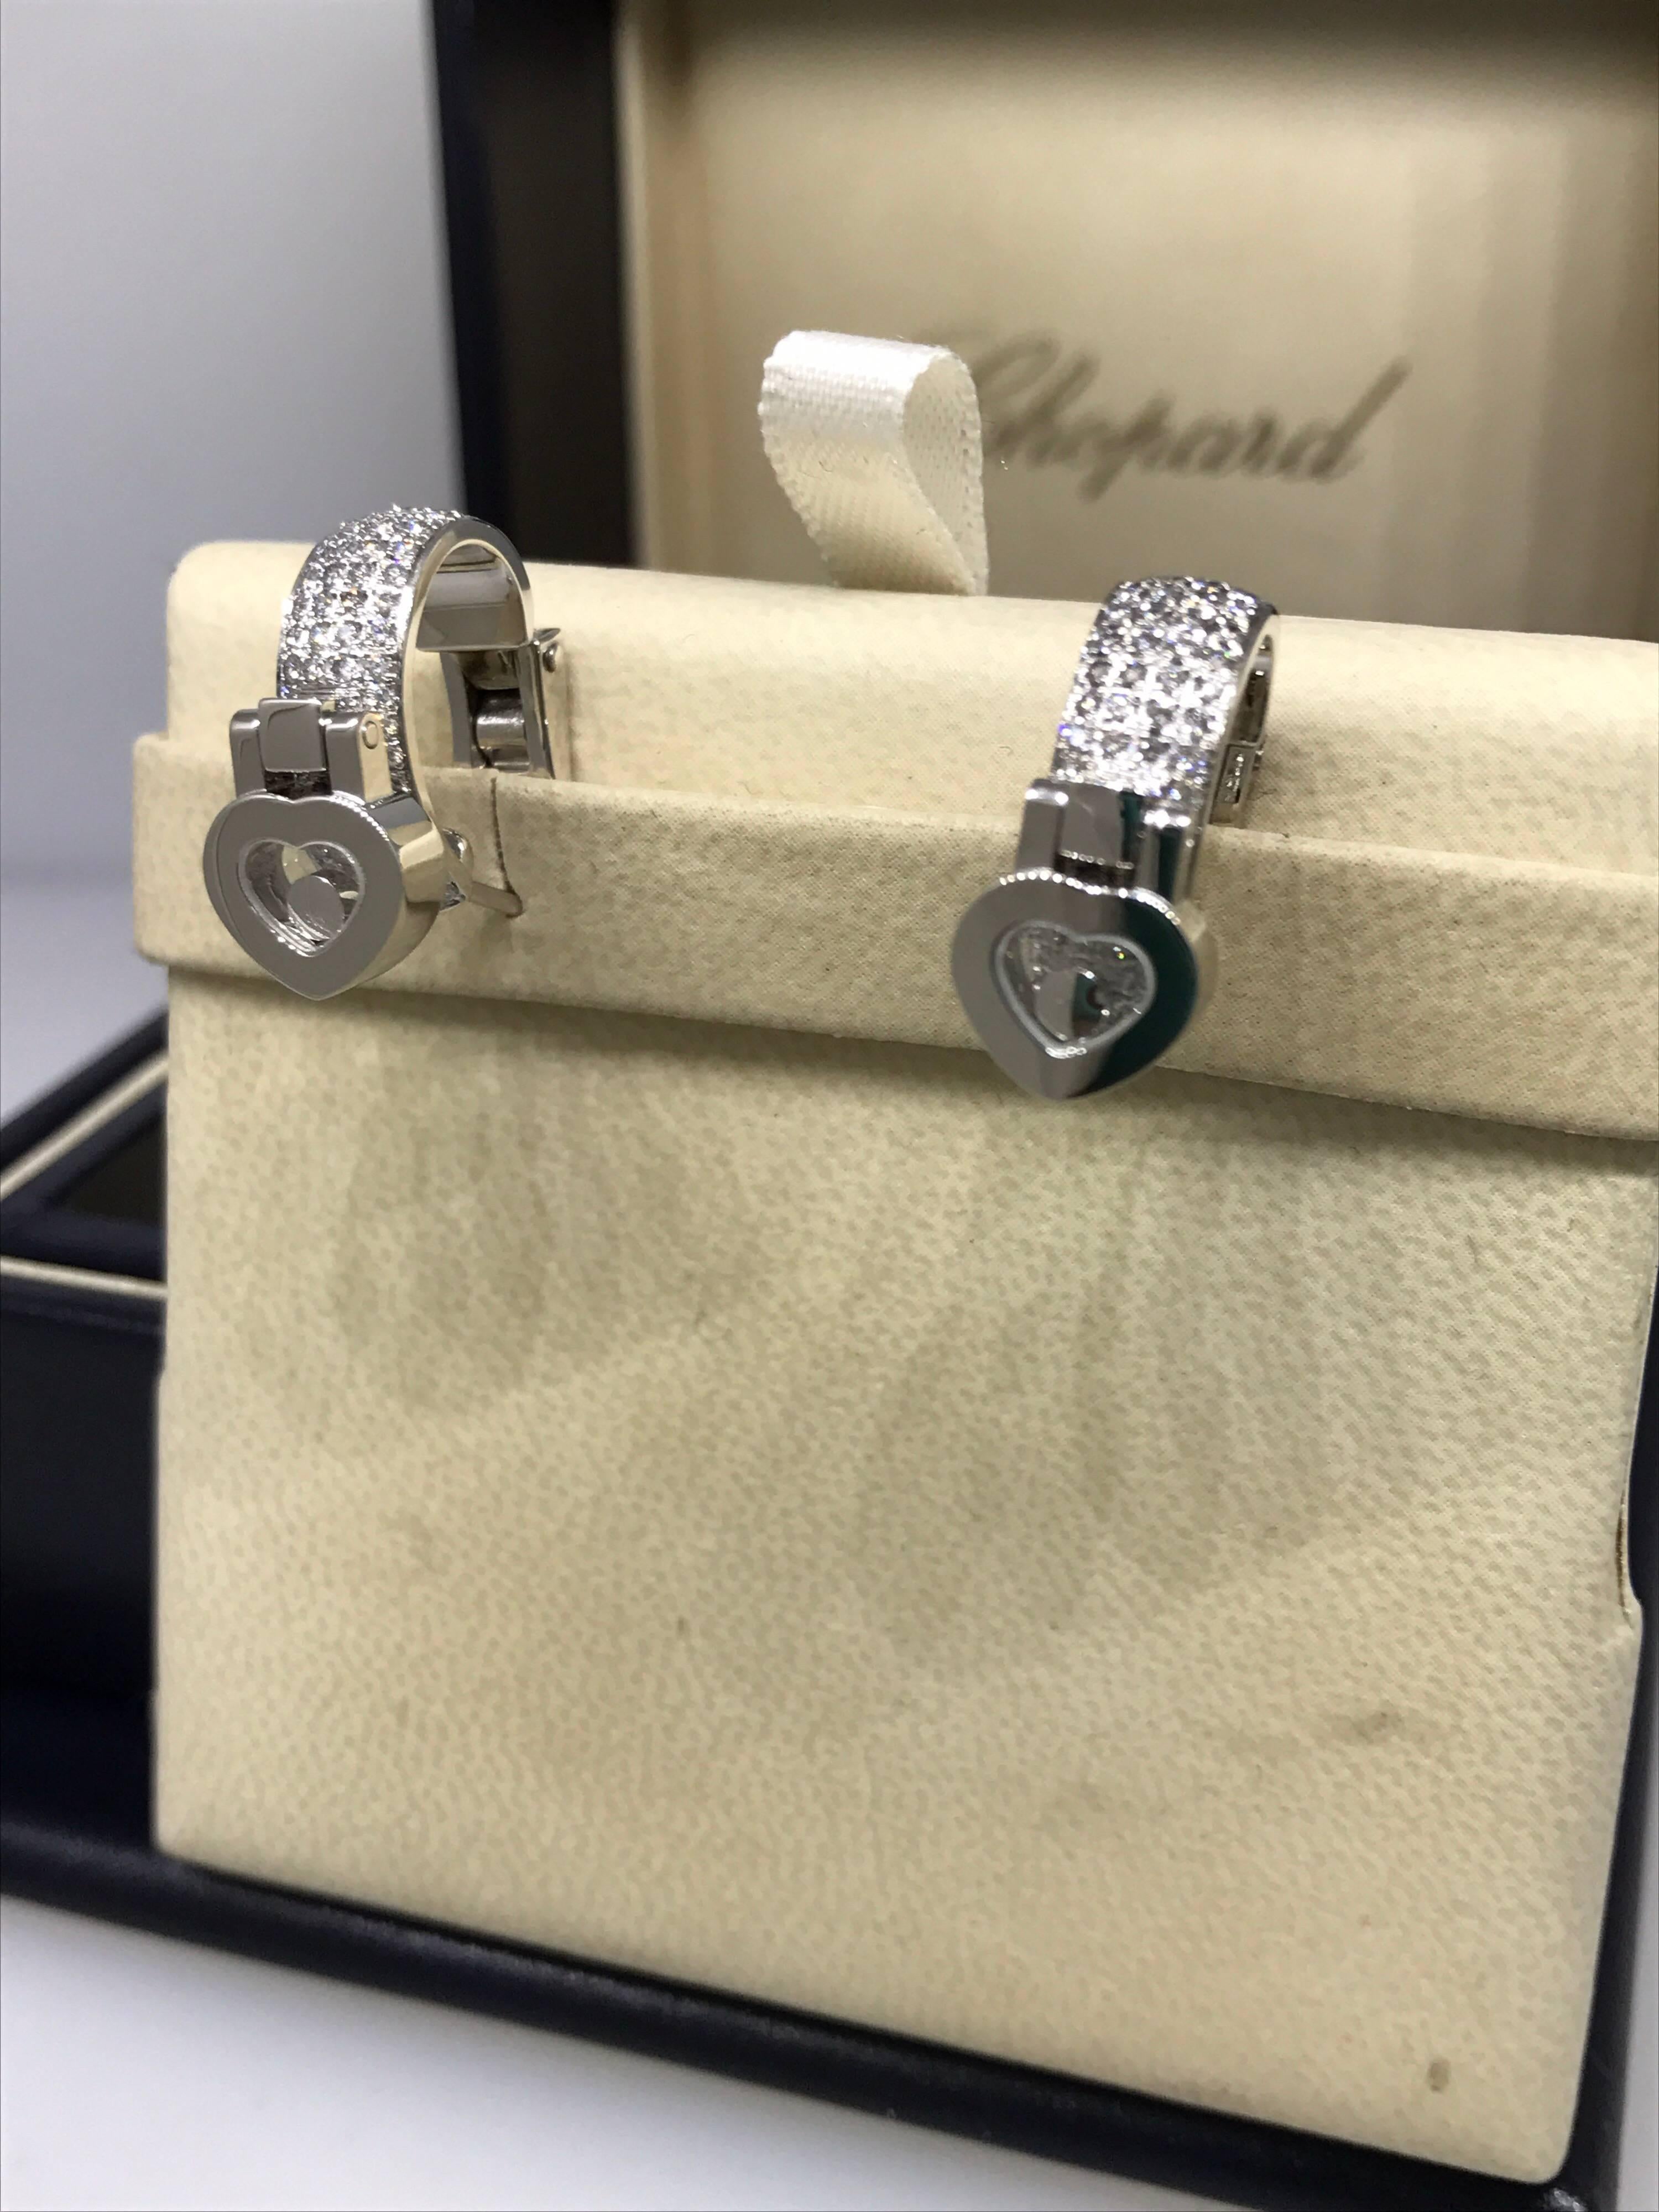 Chopard Happy Diamonds Heart Earrings

Model Number: 84/6987-1001

100% Authentic

Brand New

Comes with original Chopard box, certificate of authenticity and warranty, and instruction manual

18 Karat White Gold (14.8gr)

184 Diamonds Total on the